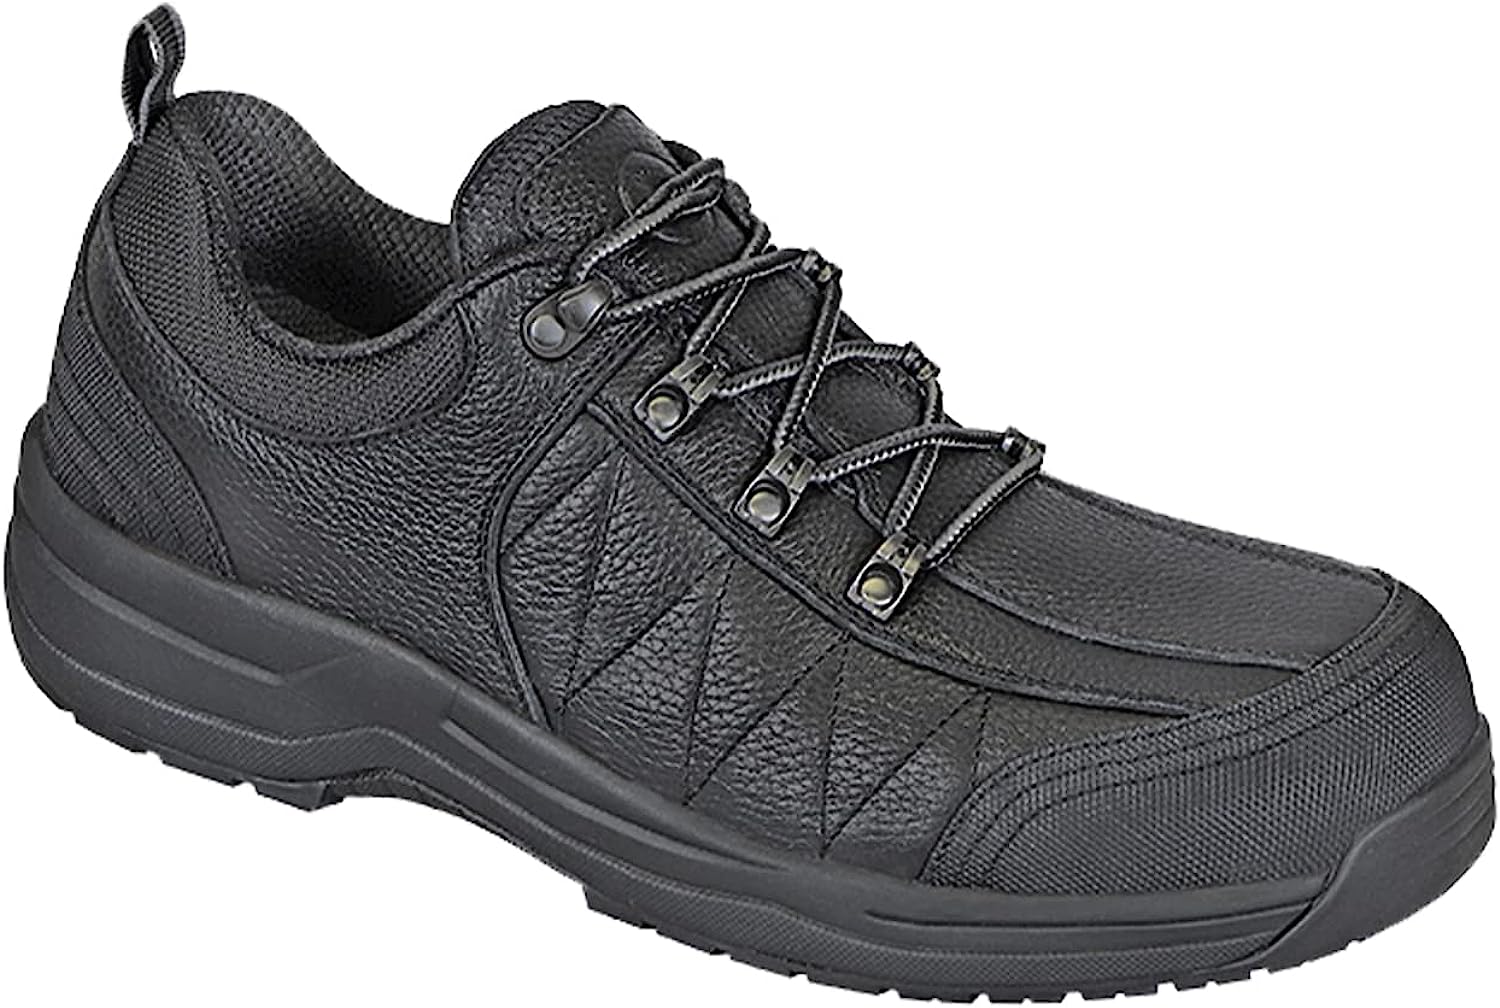 Orthofeet Orthopedic Men’s Work Shoes, Arch Support [...]